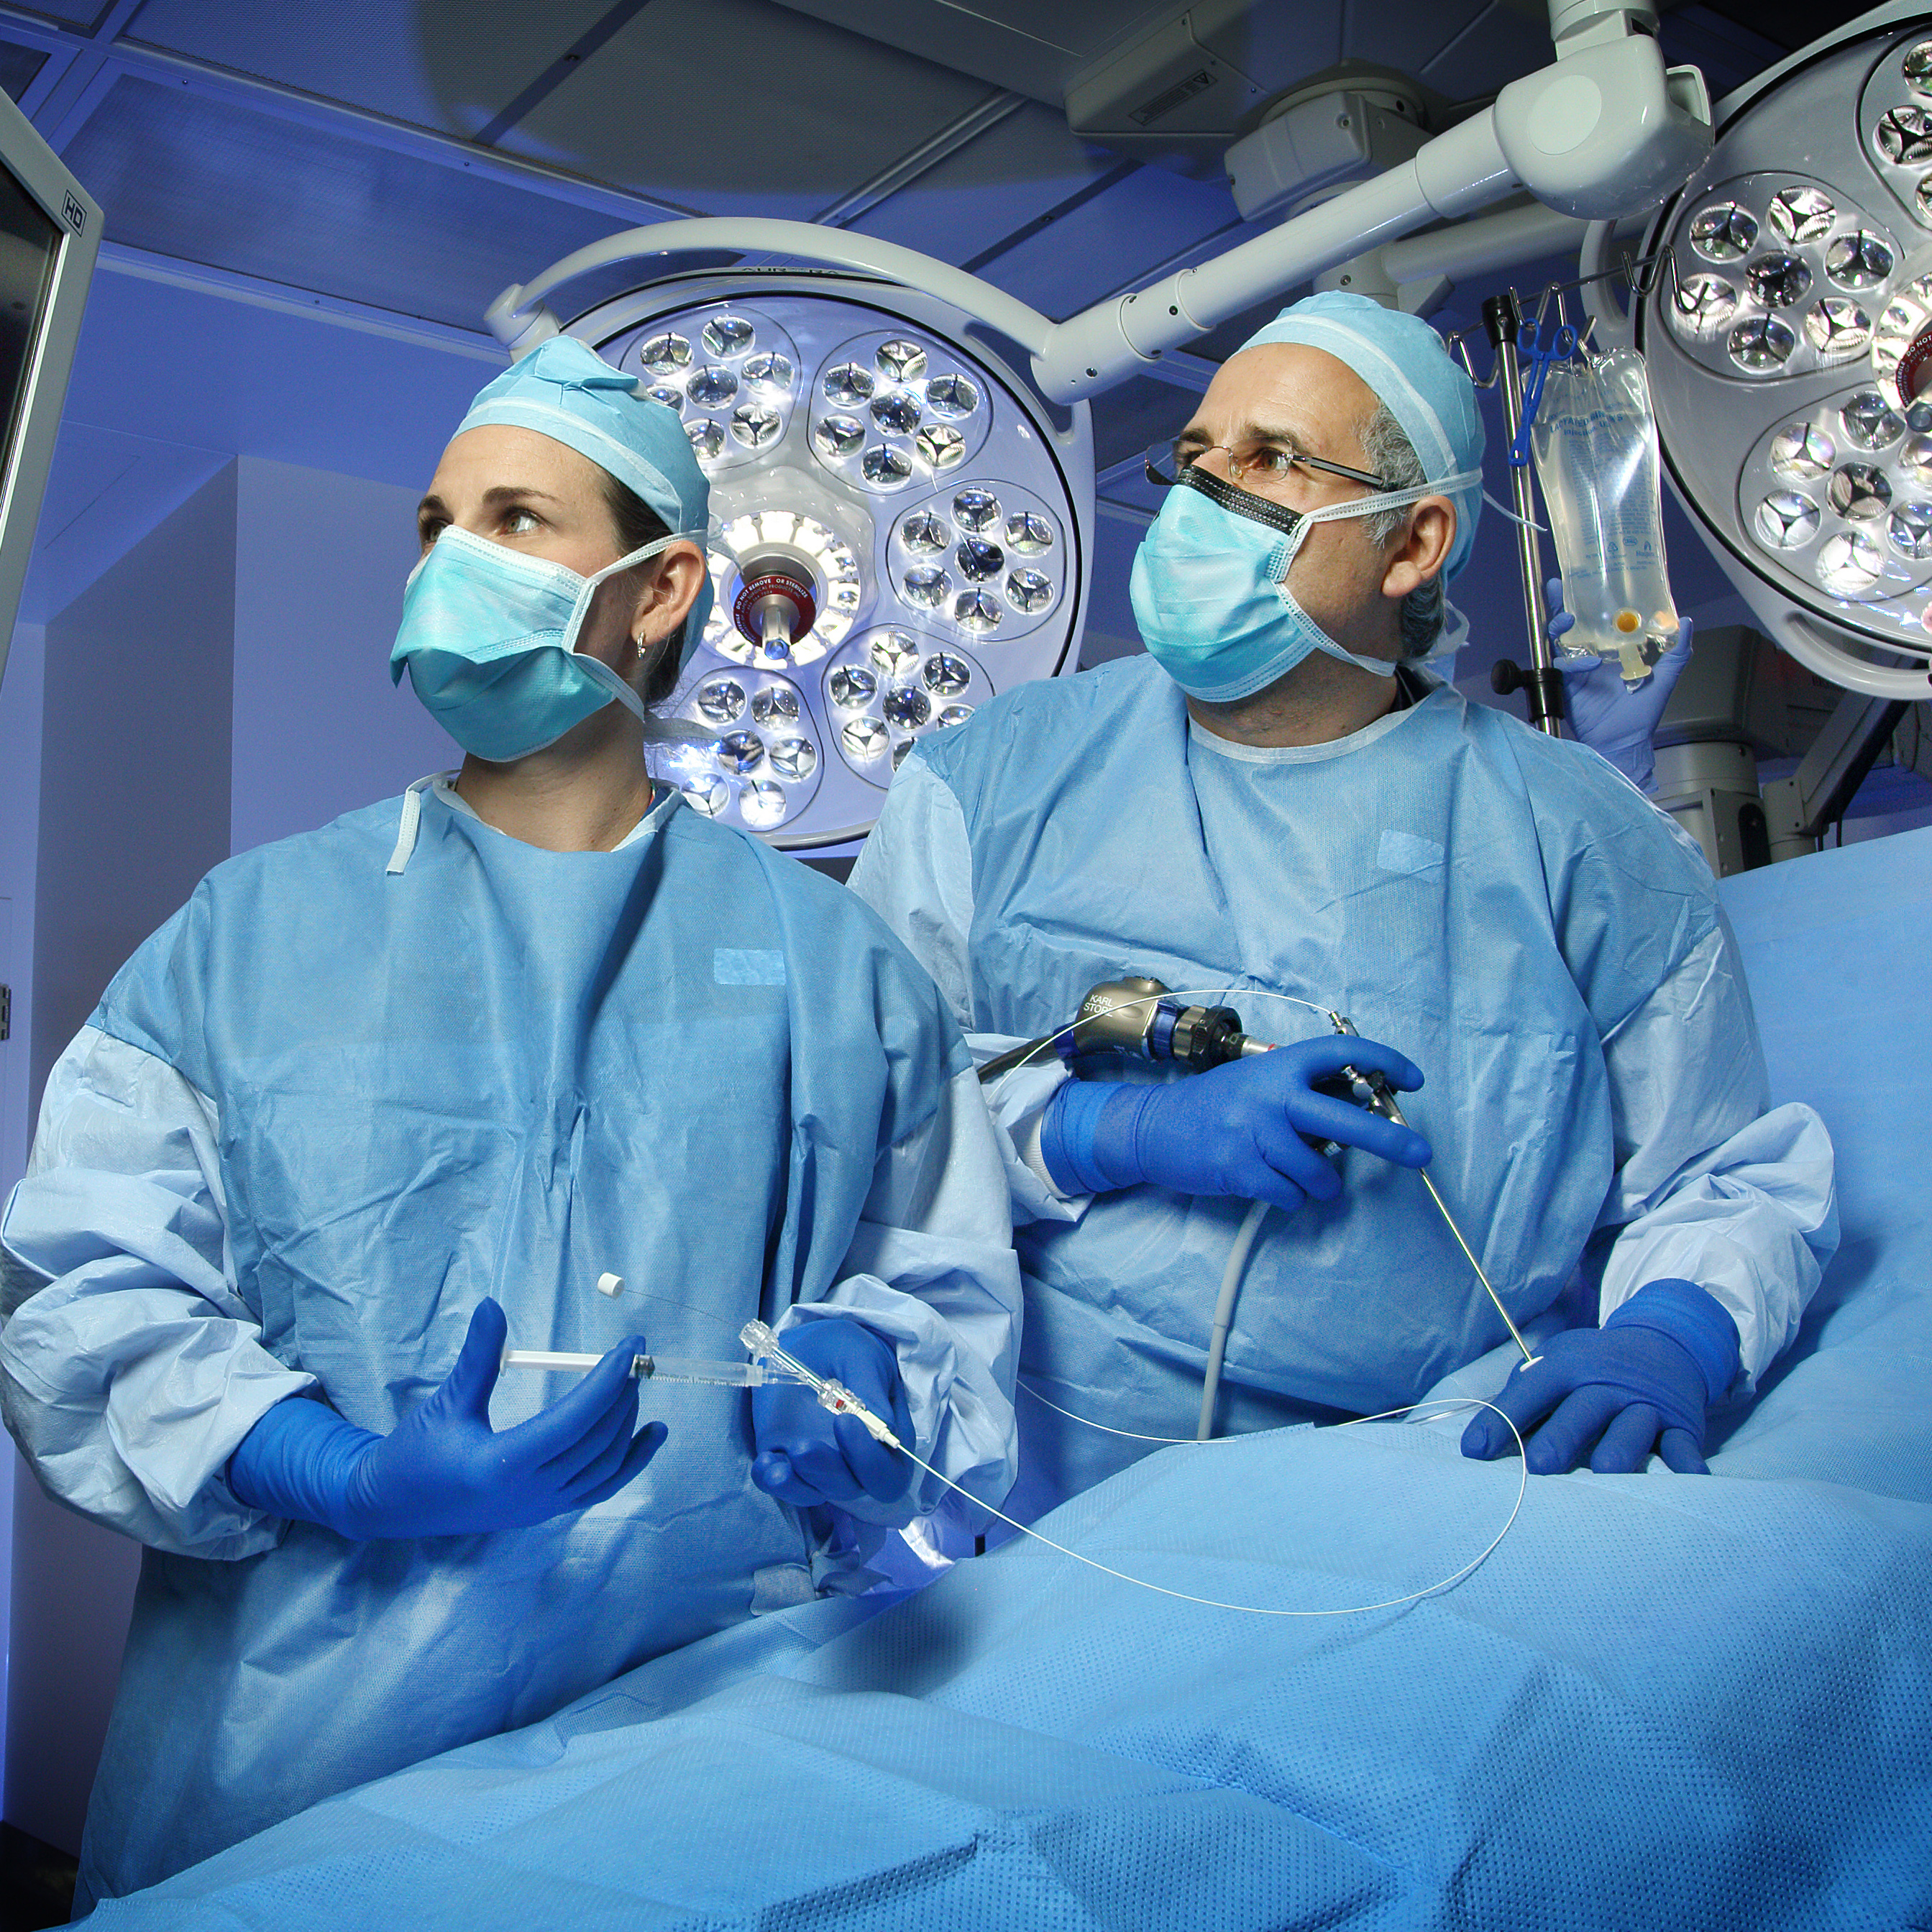 Jena Miller and Ahmet Baschat demonstrate a fetoscope in an OR setting. Both are wearing surgical gowns, caps, masks and gloves and are looking at a monitor screen.